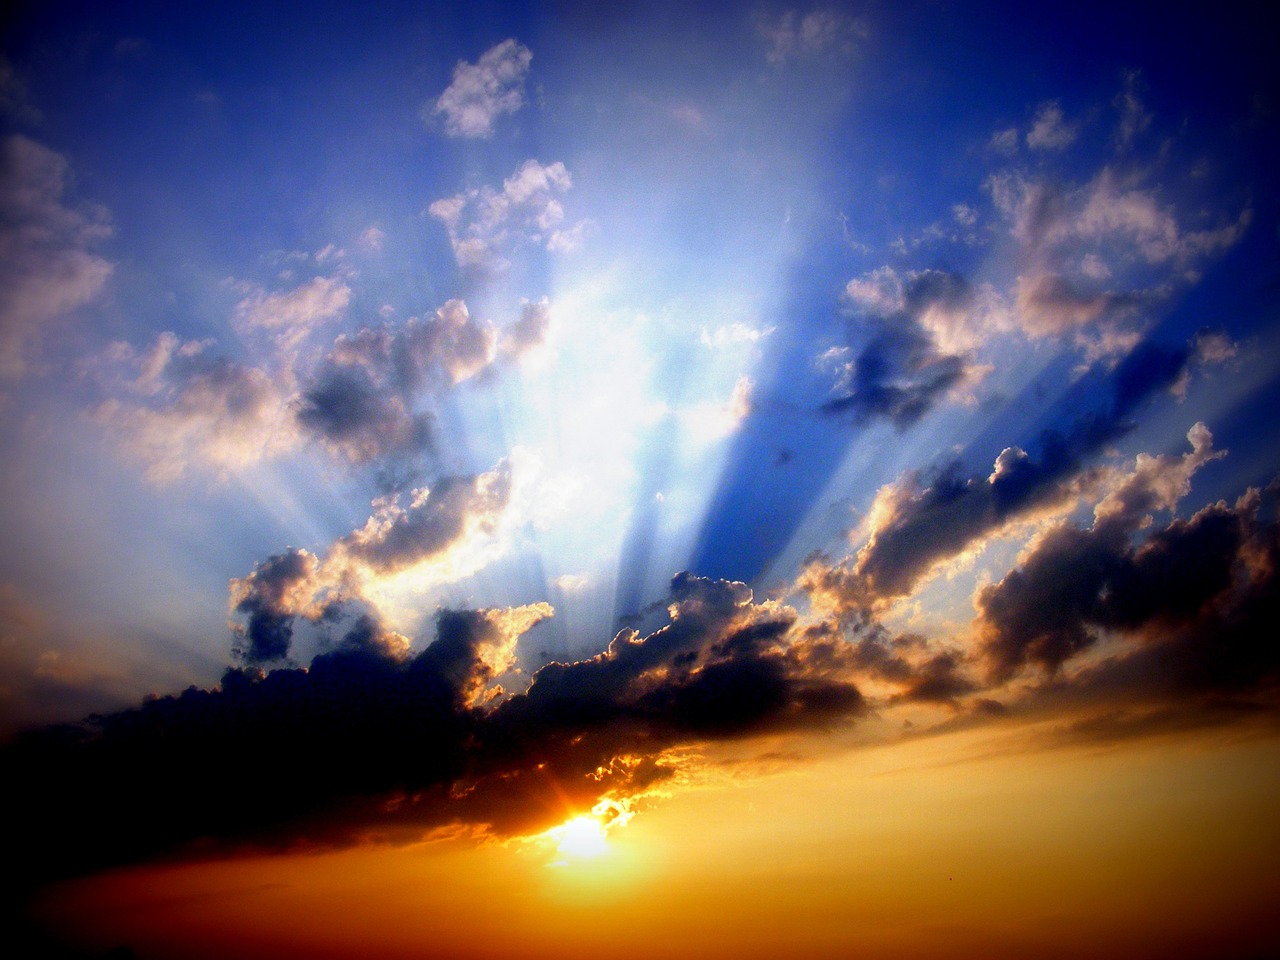 the sun is shining brightly through the clouds, a picture, by Eugeniusz Zak, godly light, shiny skin”